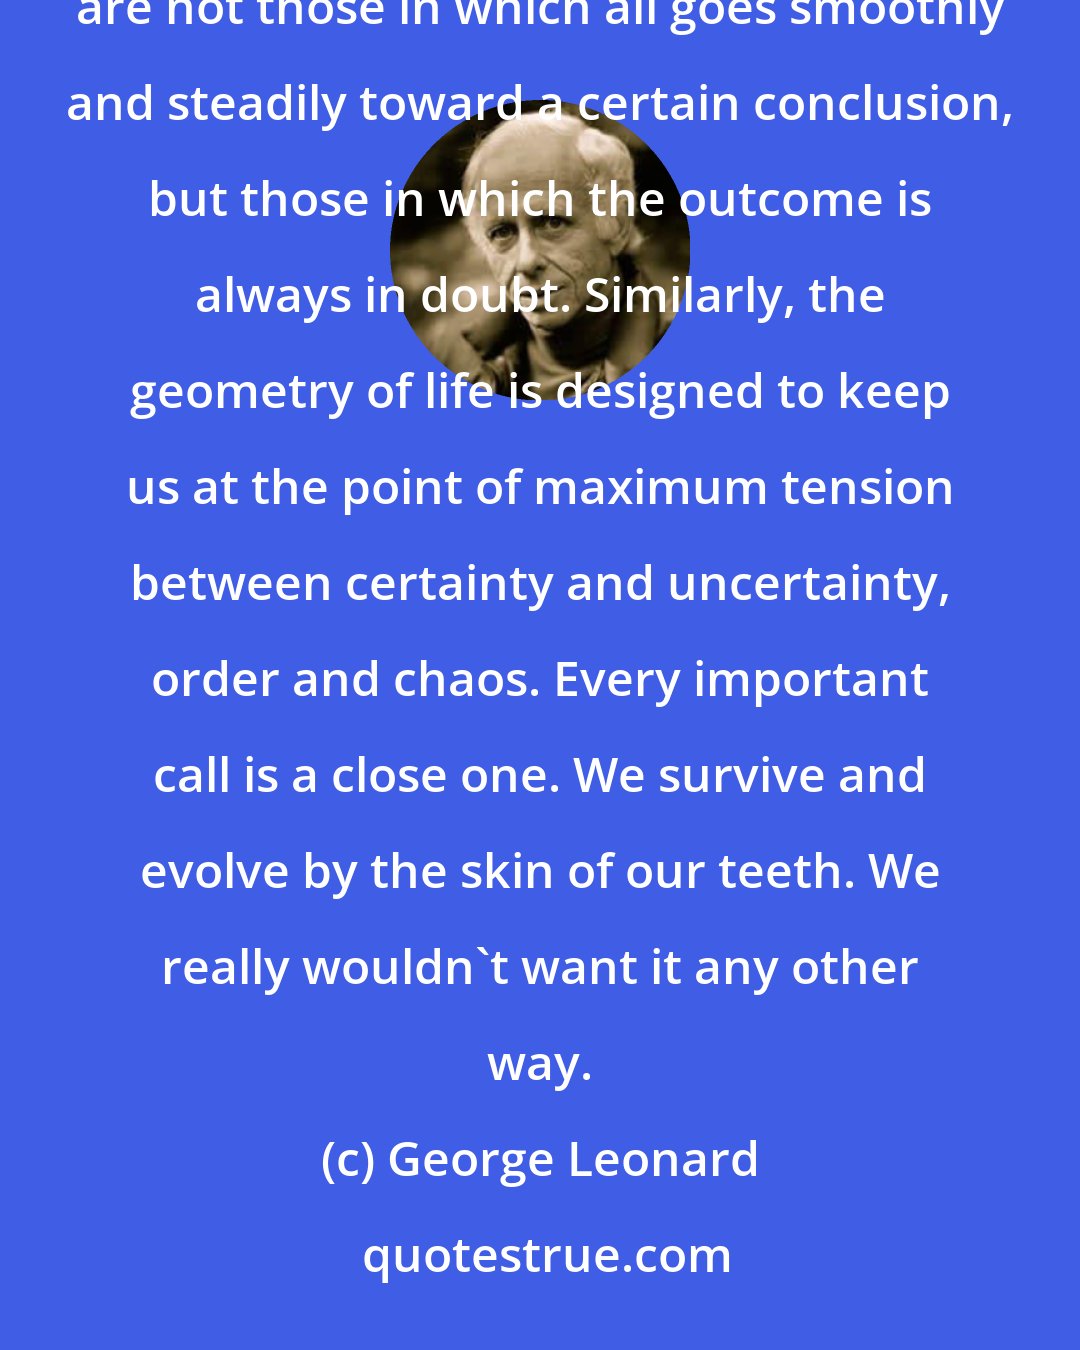 George Leonard: In terms of the game theory, we might say the universe is so constituted as to maximize play. The best games are not those in which all goes smoothly and steadily toward a certain conclusion, but those in which the outcome is always in doubt. Similarly, the geometry of life is designed to keep us at the point of maximum tension between certainty and uncertainty, order and chaos. Every important call is a close one. We survive and evolve by the skin of our teeth. We really wouldn't want it any other way.